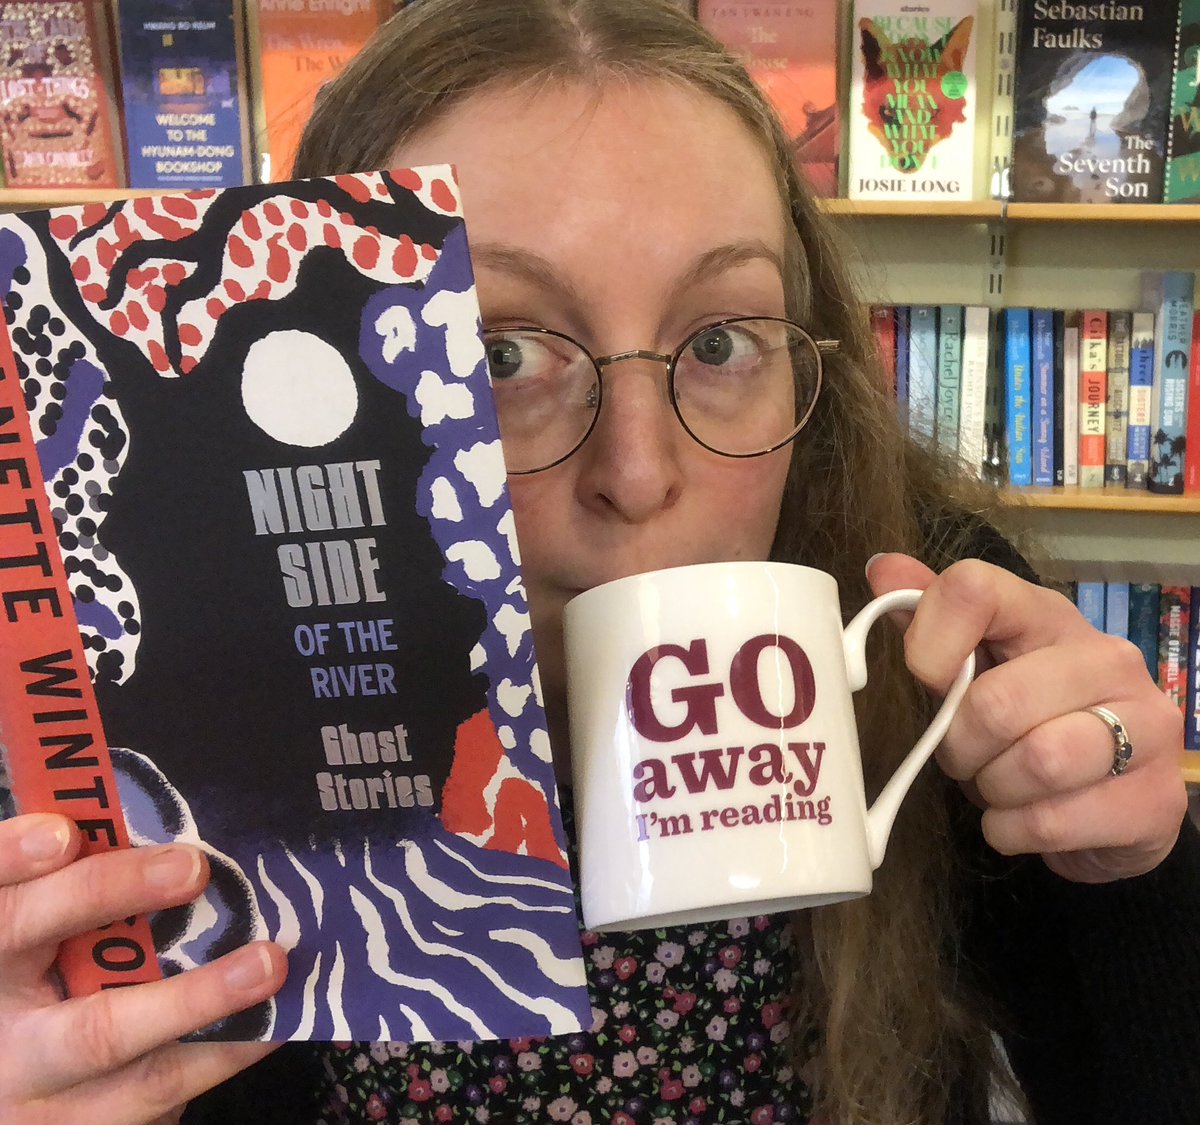 Is anyone spending time with family this festive season and wondering how to subtly let them know when you need a bit of time to yourself? Don’t worry, we’ve got you covered! 🤭 😂 #goawayimreading